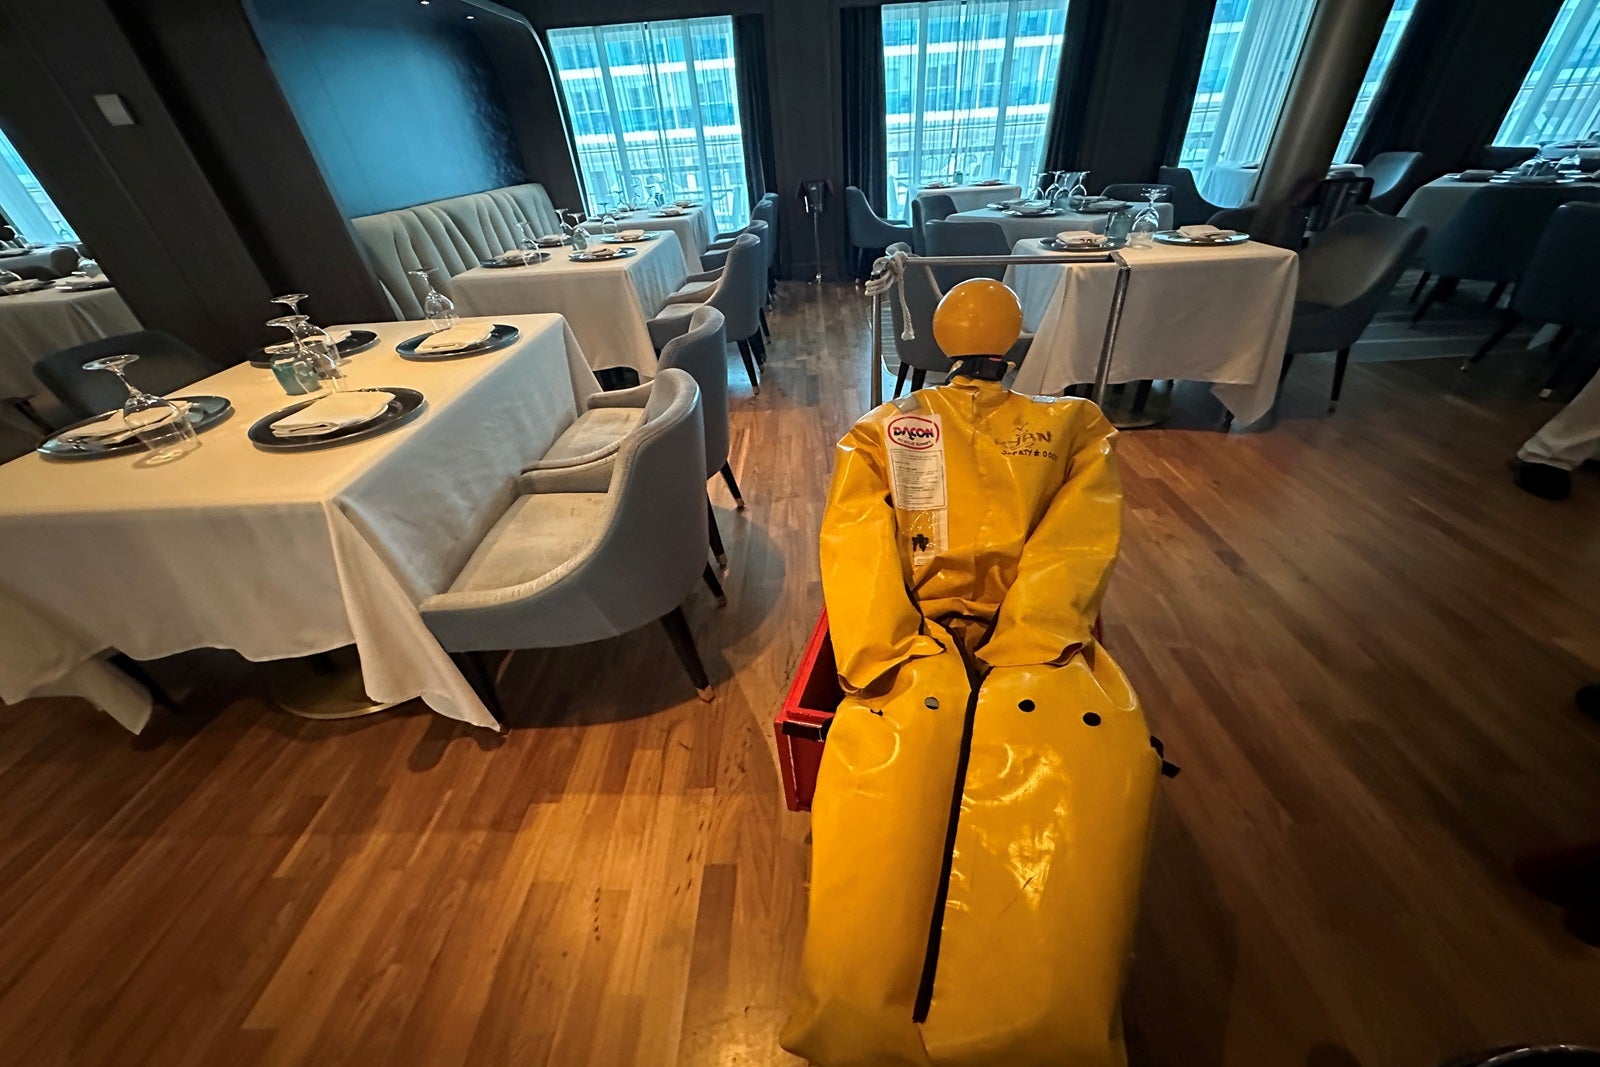 A fire rescue dummy waits in a cruise ship restaurant to be saved during a crew drill